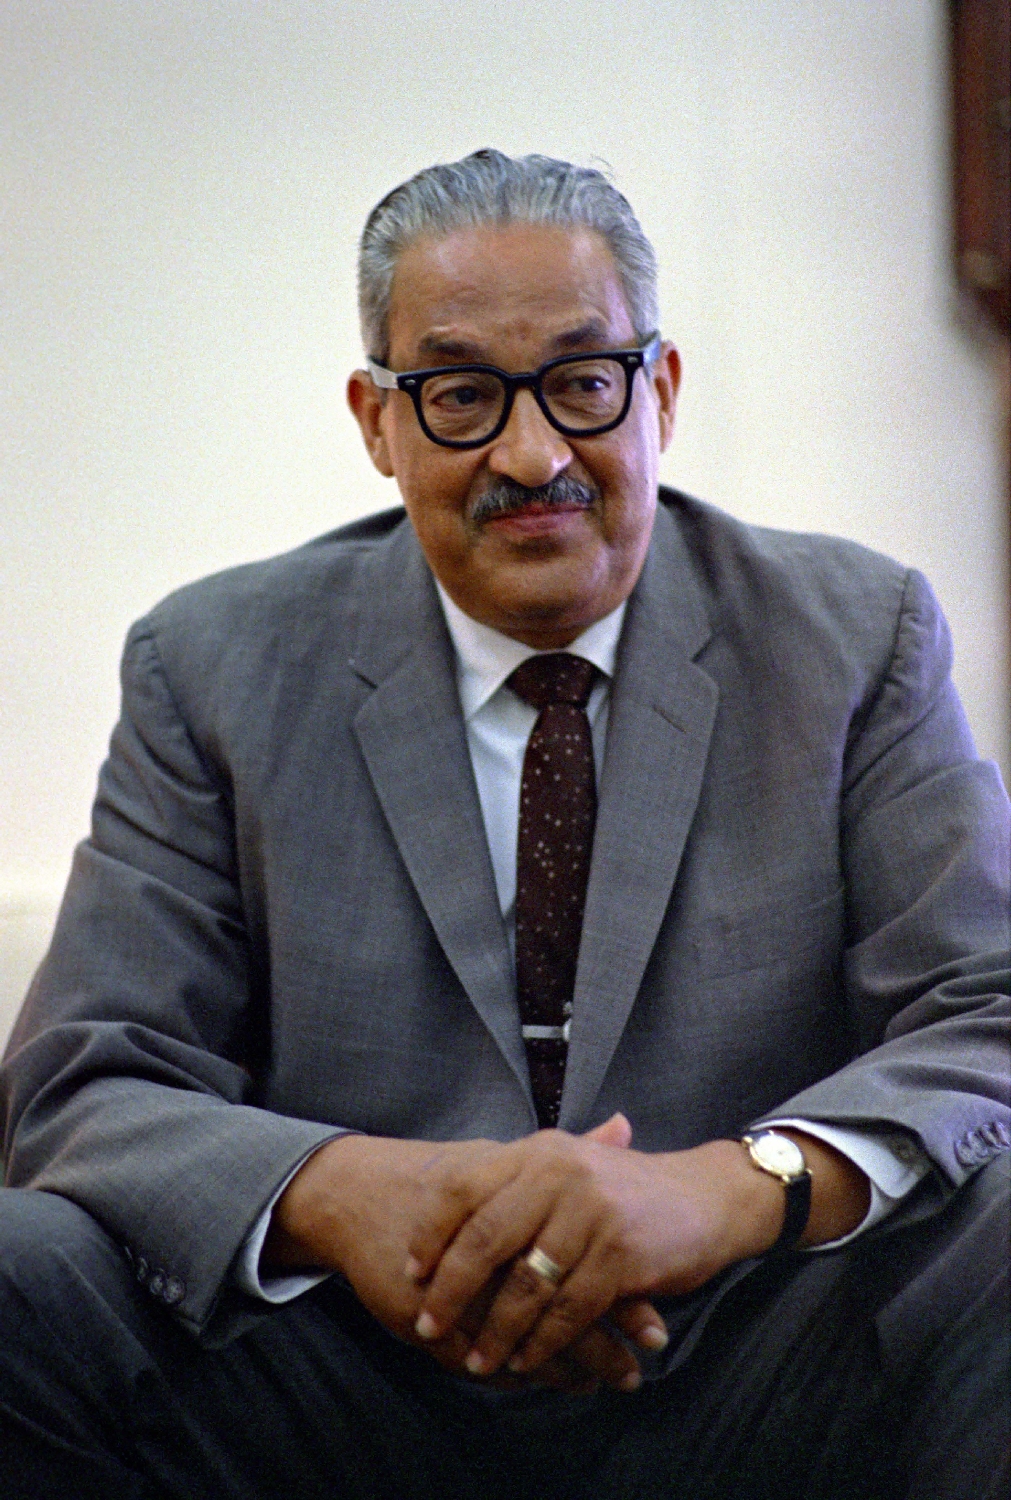 First African-American U.S. Supreme Court Justice